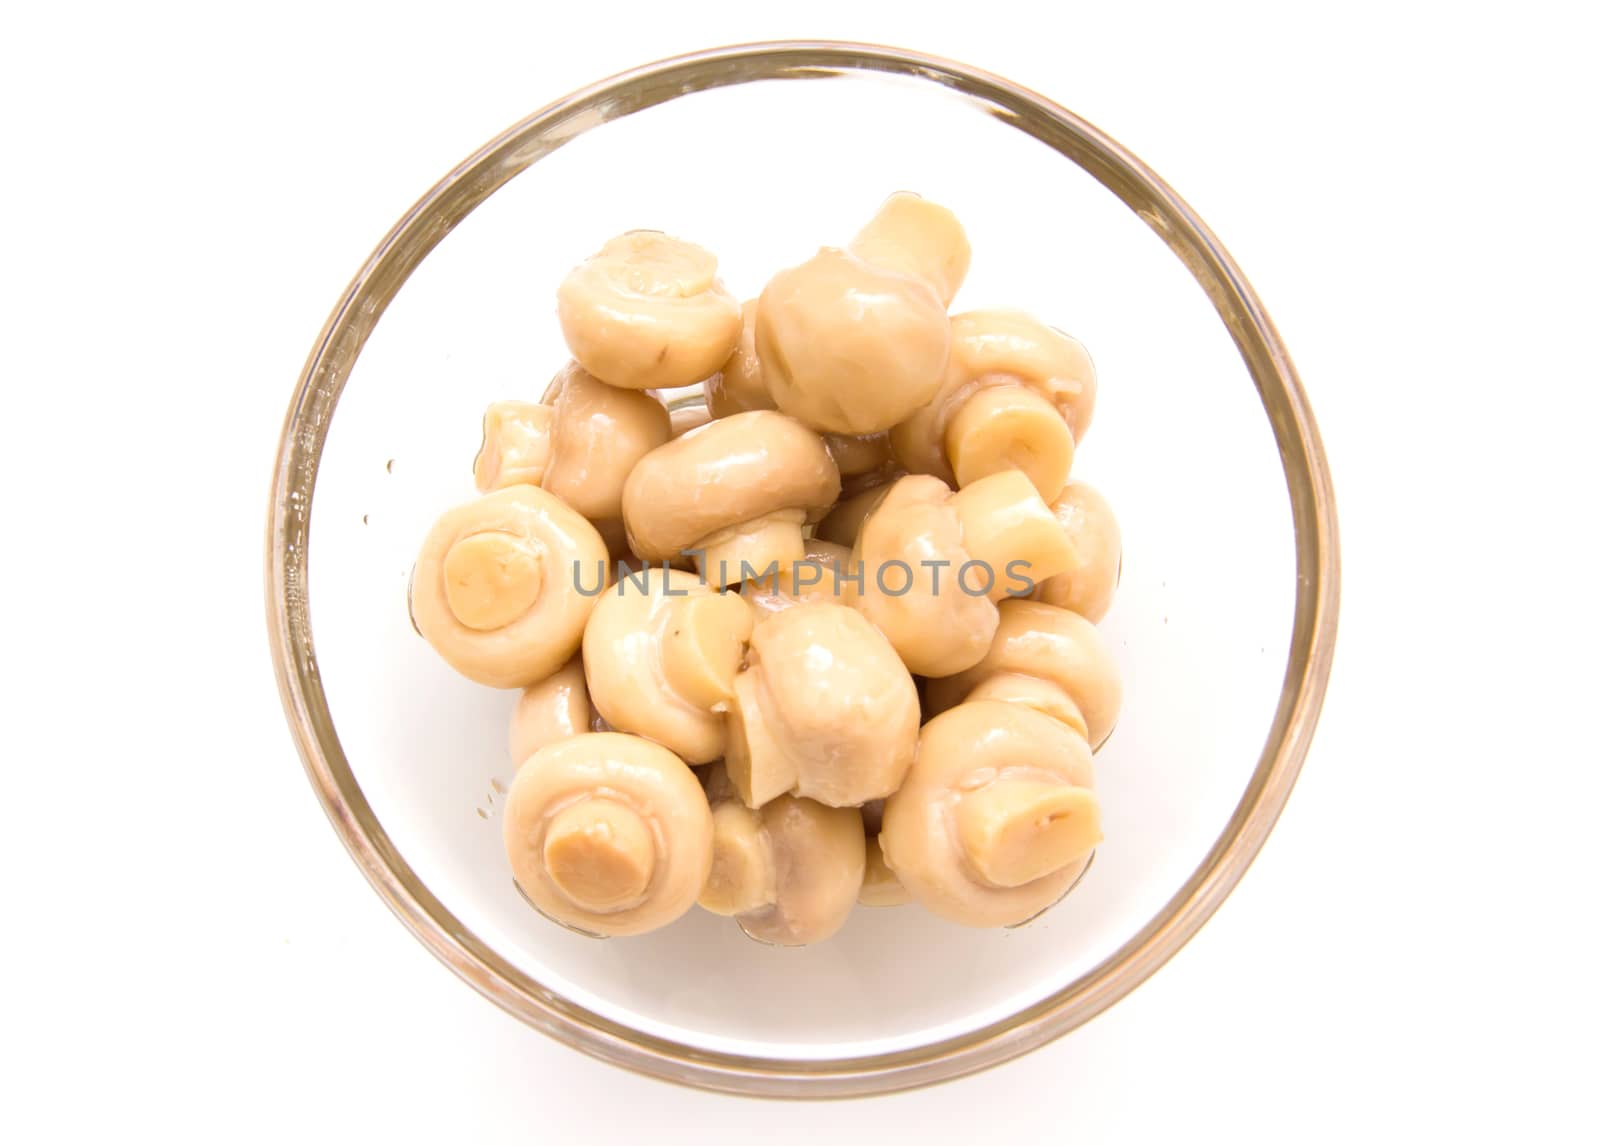 Mushrooms in glass bowl on white background seen from above